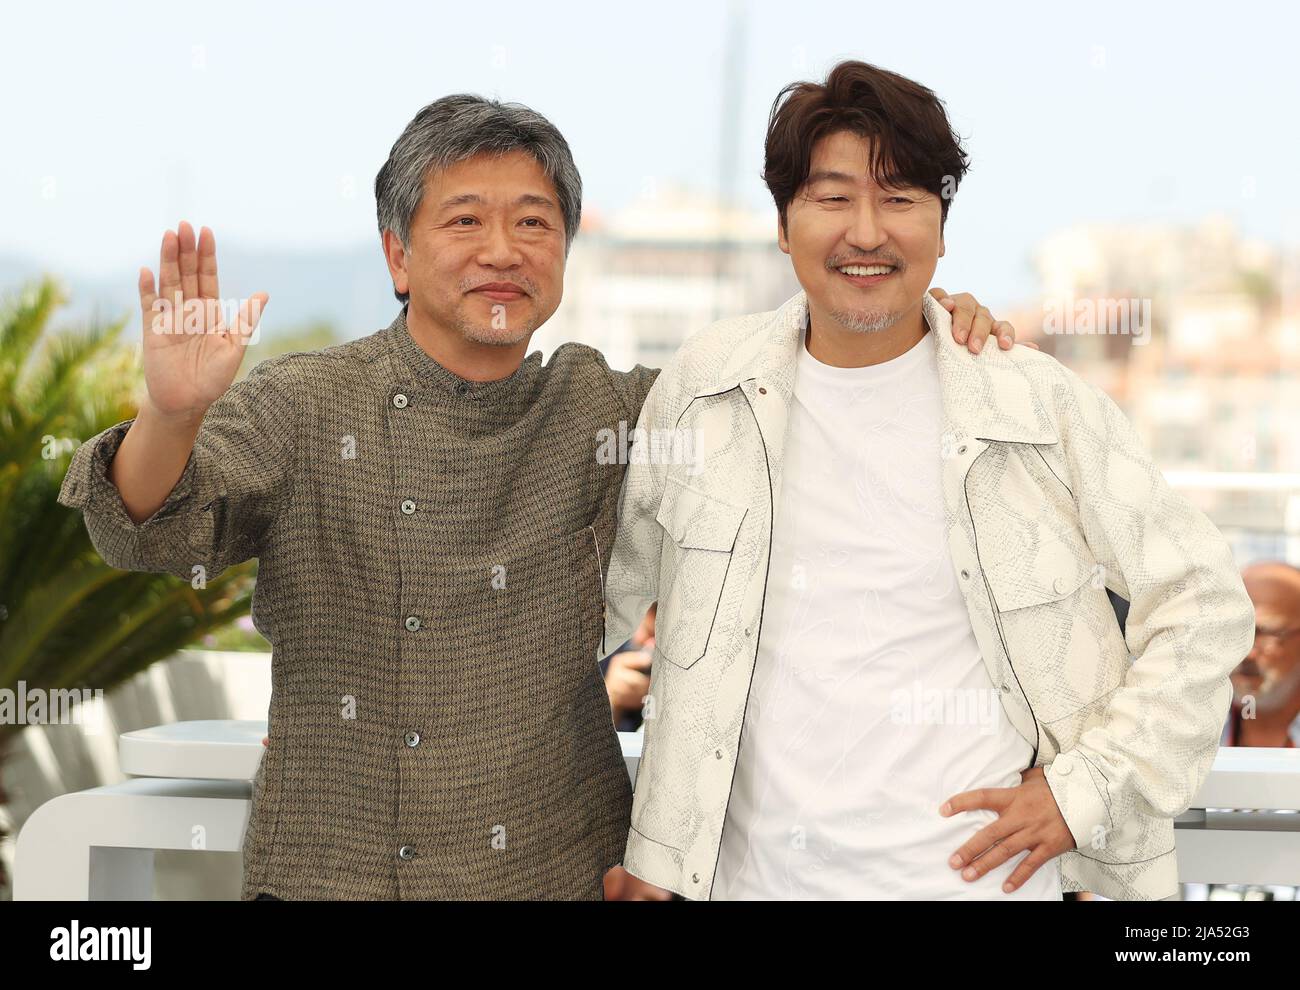 Cannes, France. 27th May, 2022. South Korean actor Song Kang-Ho (R) and Japanese film director Hirokazu Kore-Eda pose during a photocall for the film 'Broker (Les Bonnes Etoiles)' presented in the Official Competition at the 75th edition of the Cannes Film Festival in Cannes, southern France, on May 27, 2022. Credit: Gao Jing/Xinhua/Alamy Live News Stock Photo